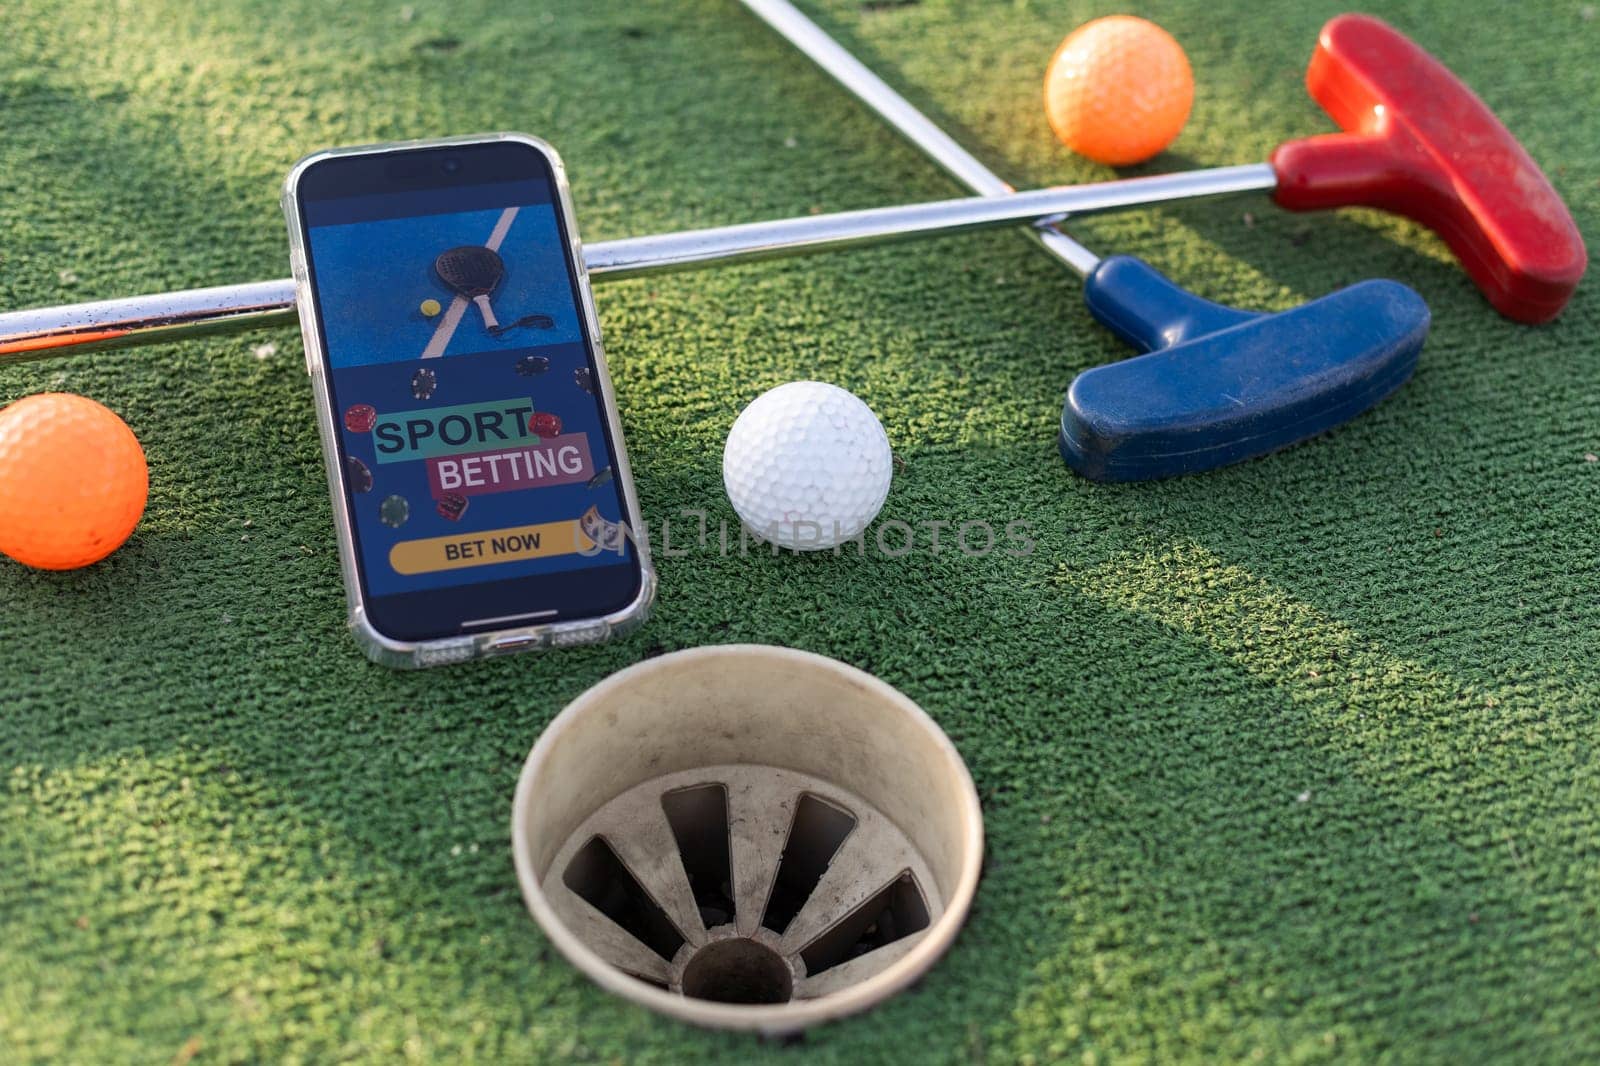 golf equipment on the green lawn. mini golf sports betting on a smartphone. High quality photo